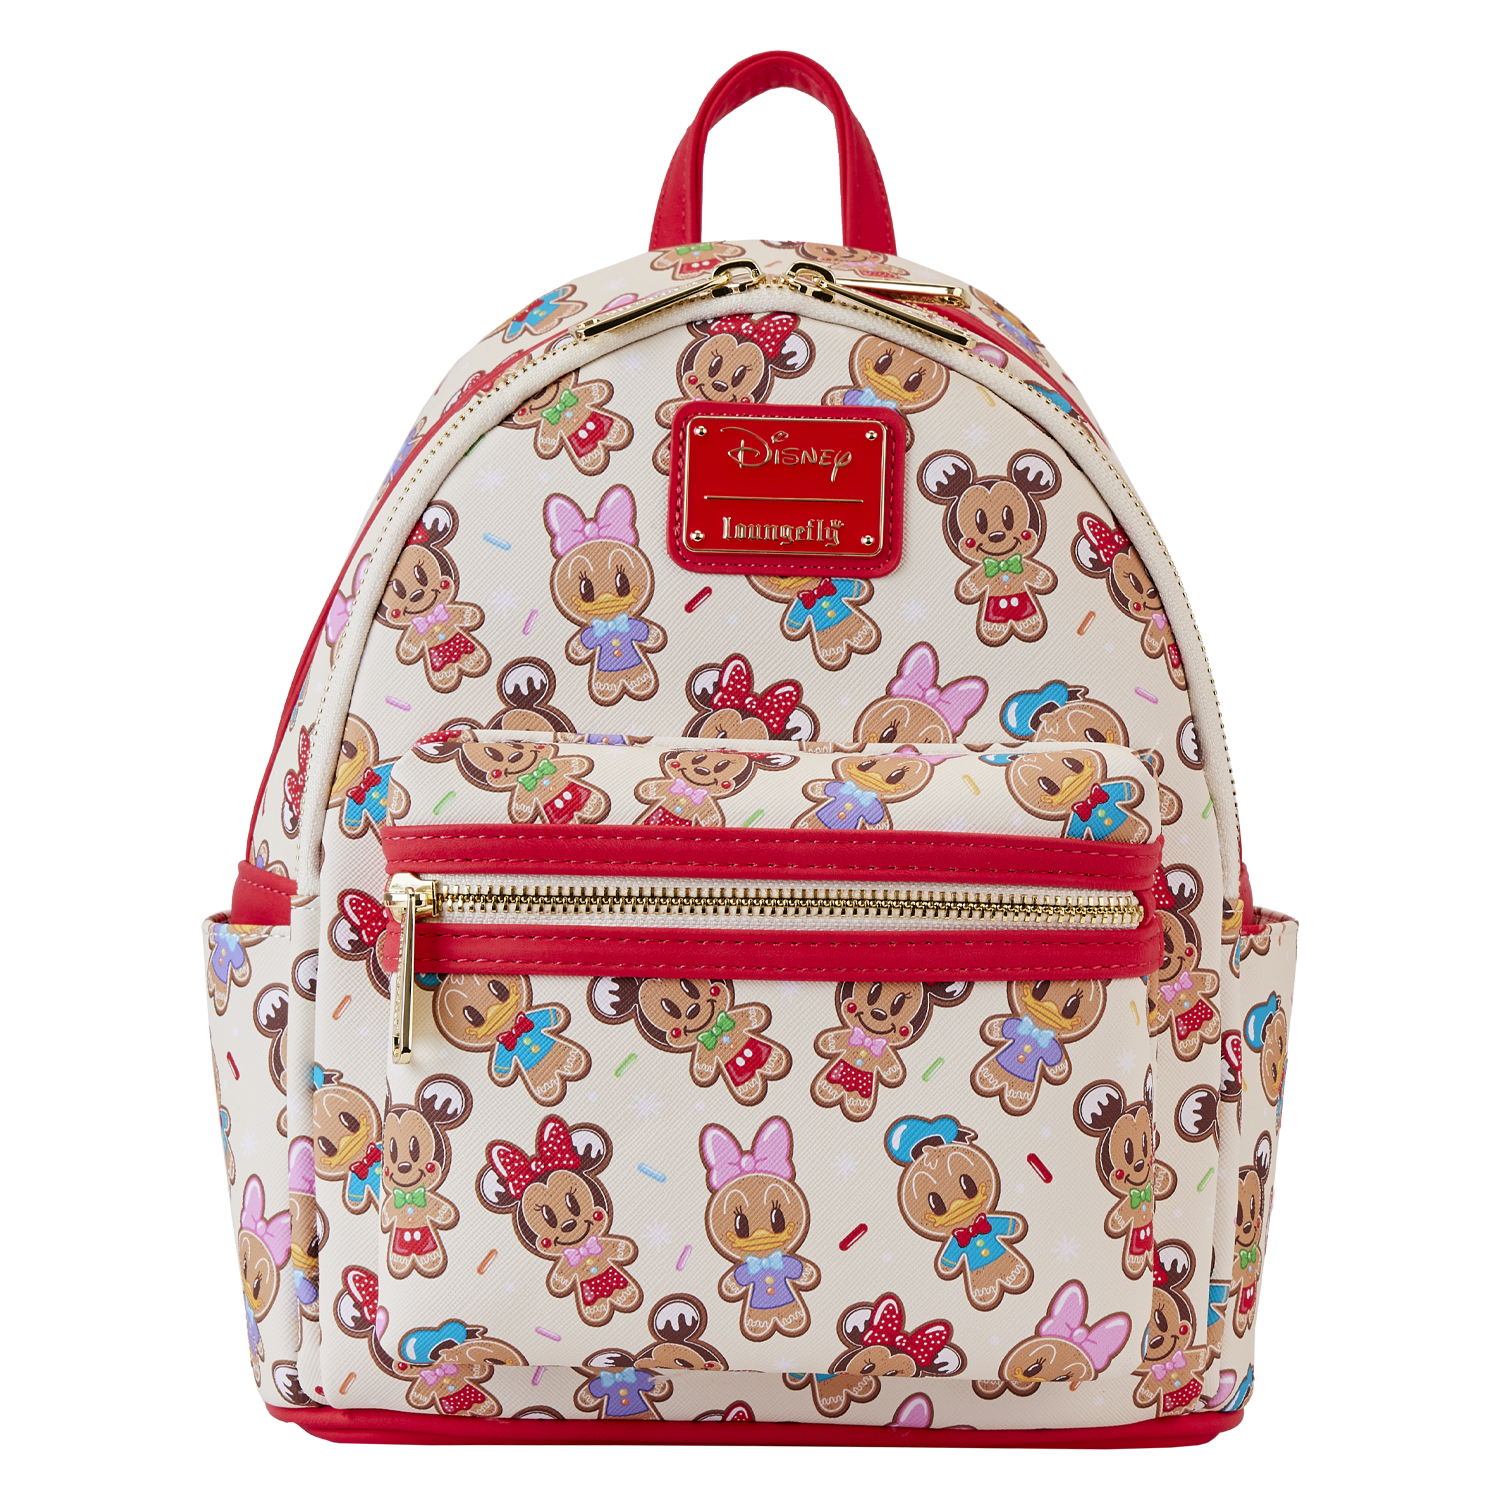 Disney 100th Mickey Mouse Club Mini Backpack